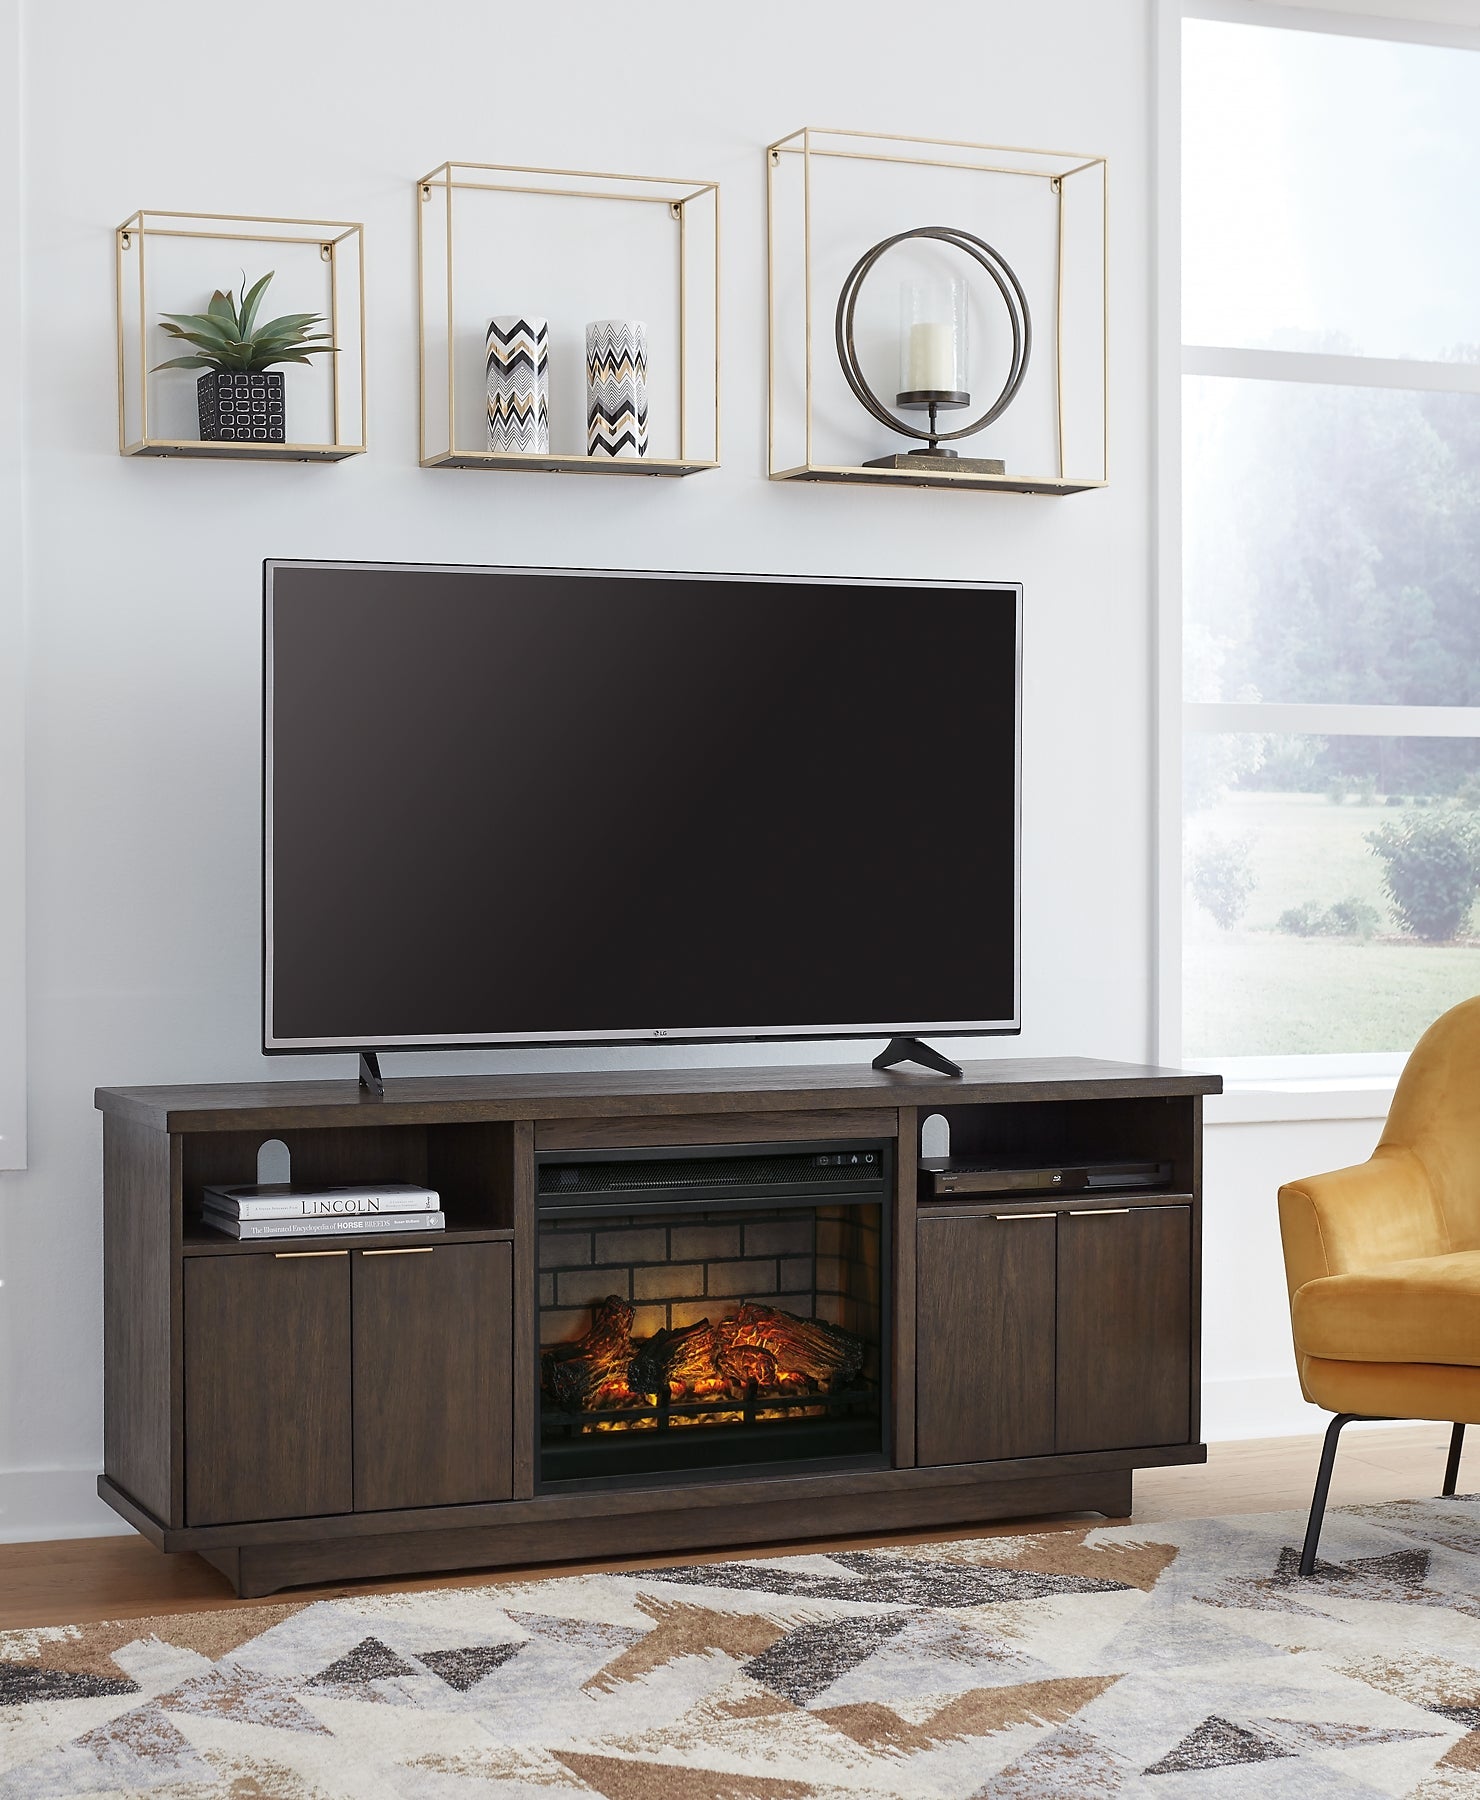 Brazburn 66" TV Stand with Electric Fireplace